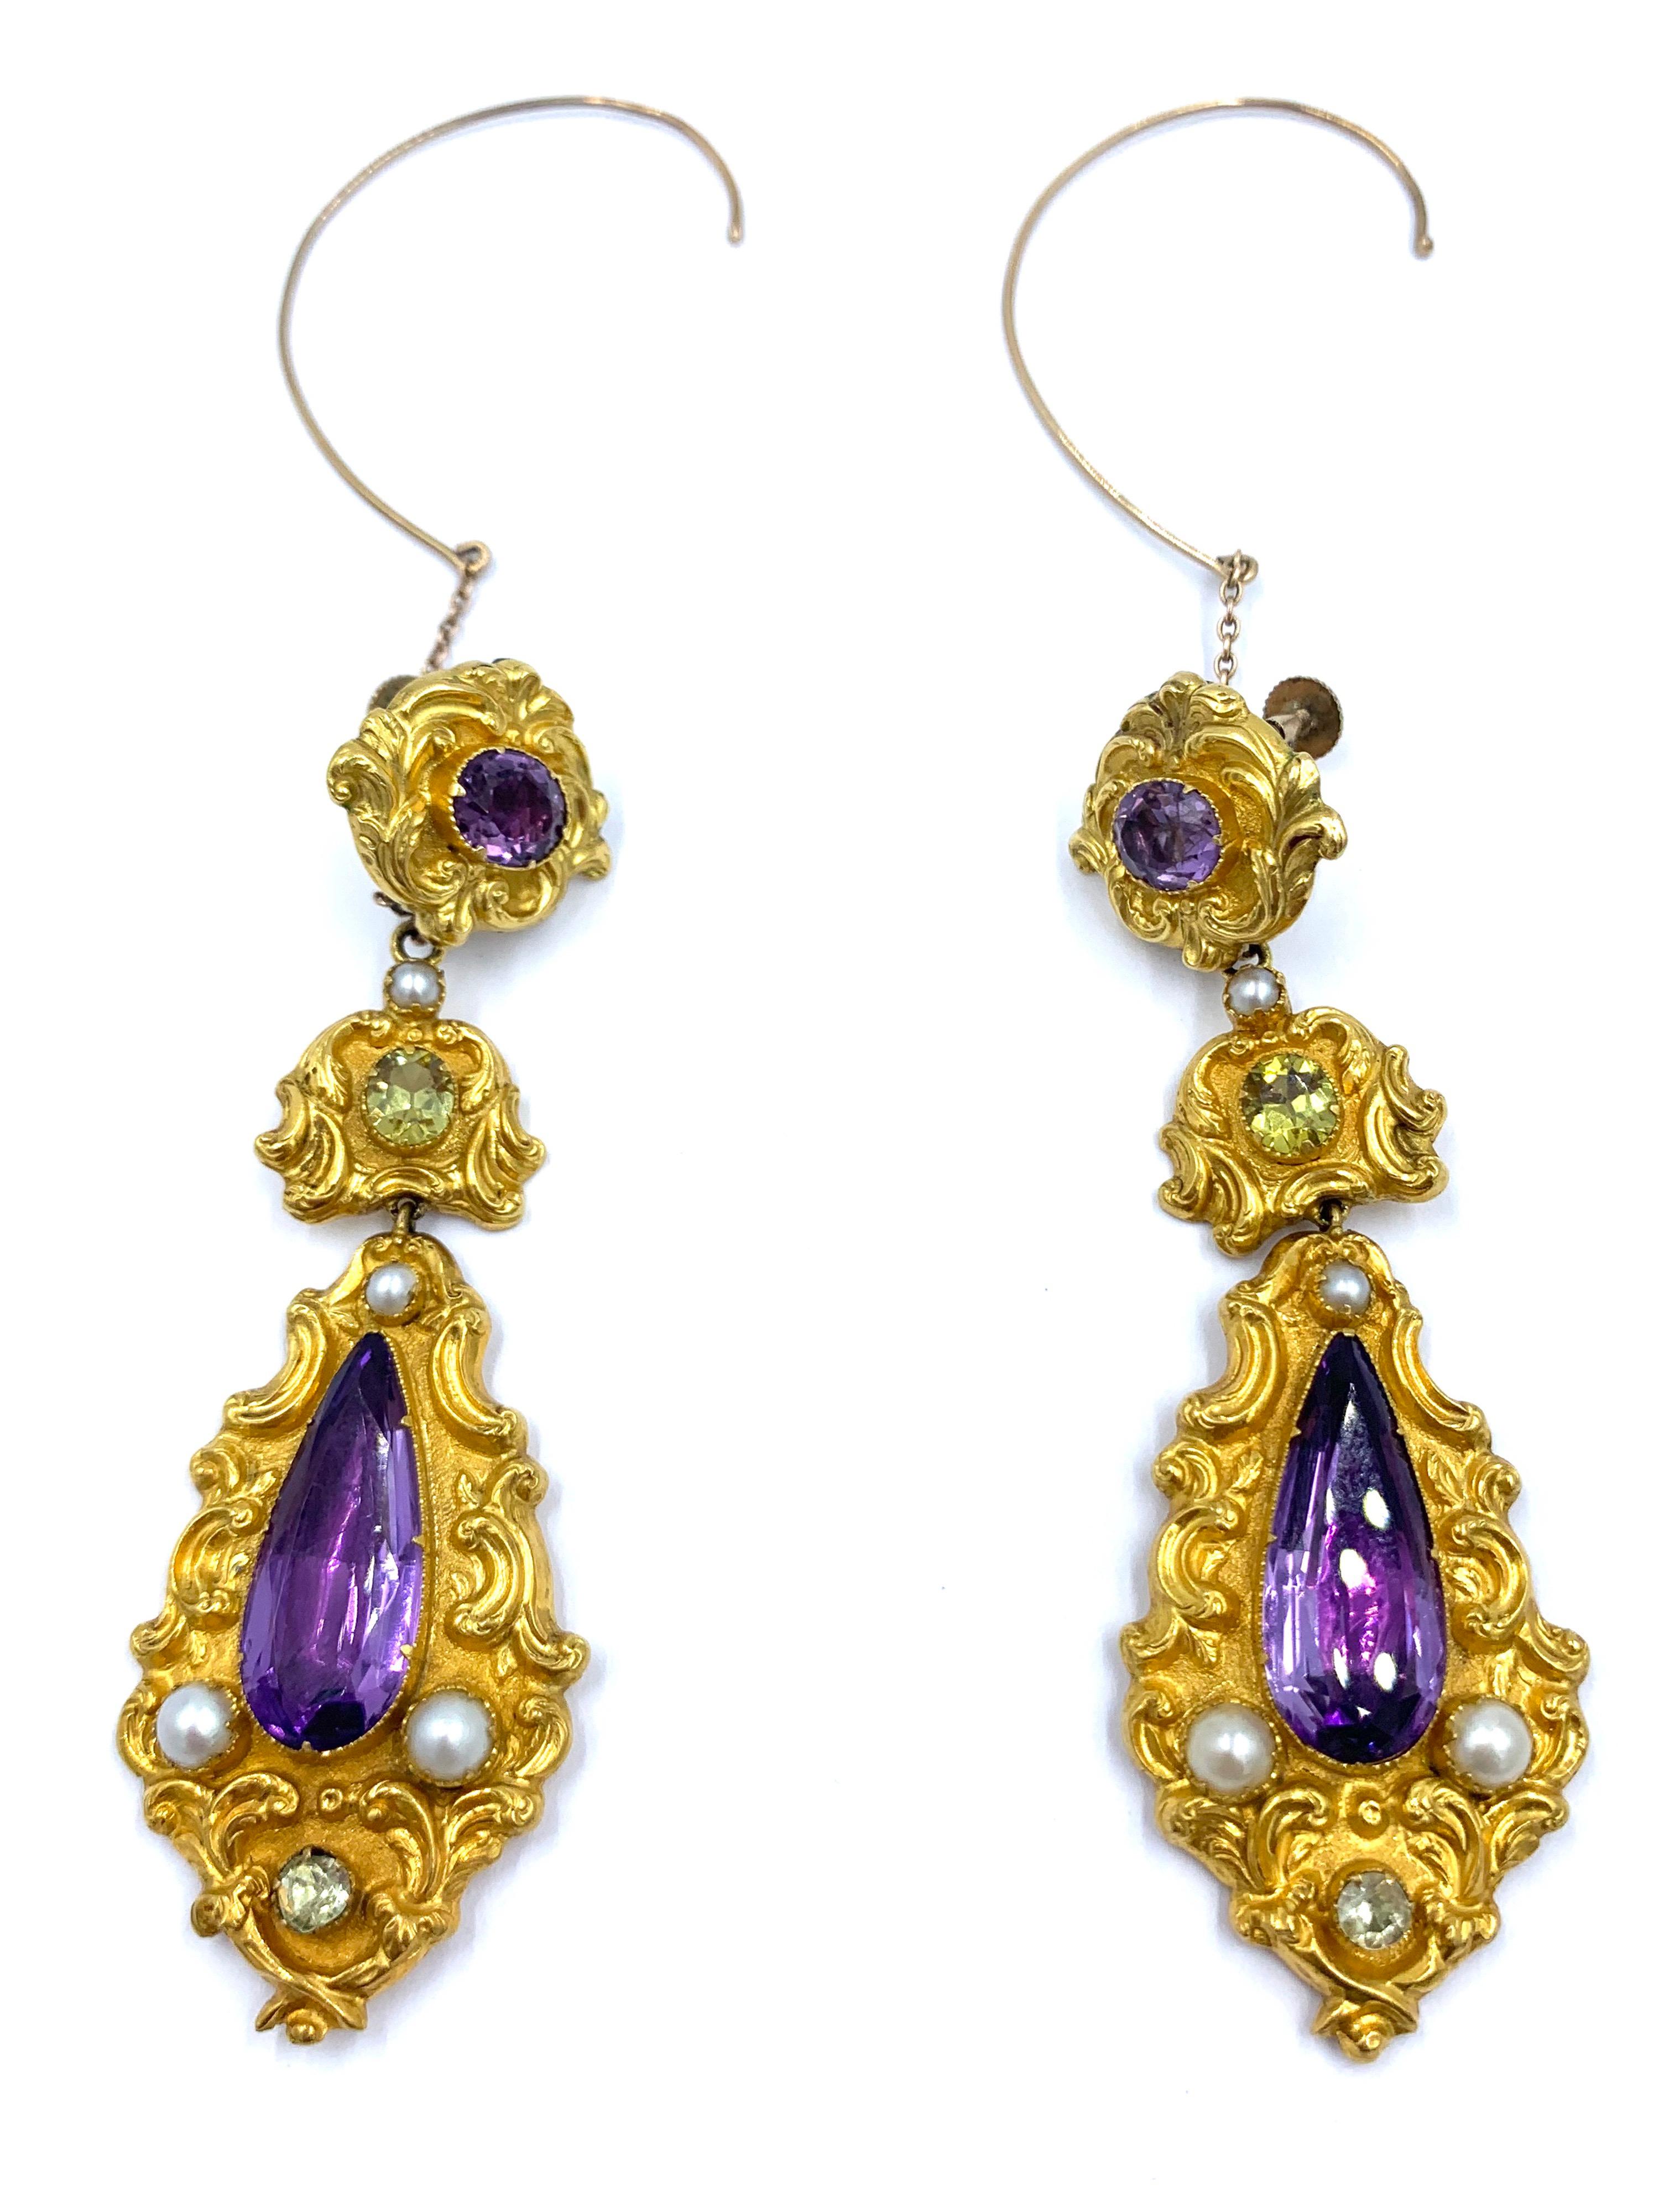 Beautiful and classic Georgian Period 18kt yellow gold earrings. These vintage dangle earrings feature amethyst stones as well as a peridot and pearls. Beautifully crafted real Georgian Period jewelry. These earrings are currently fashioned with an